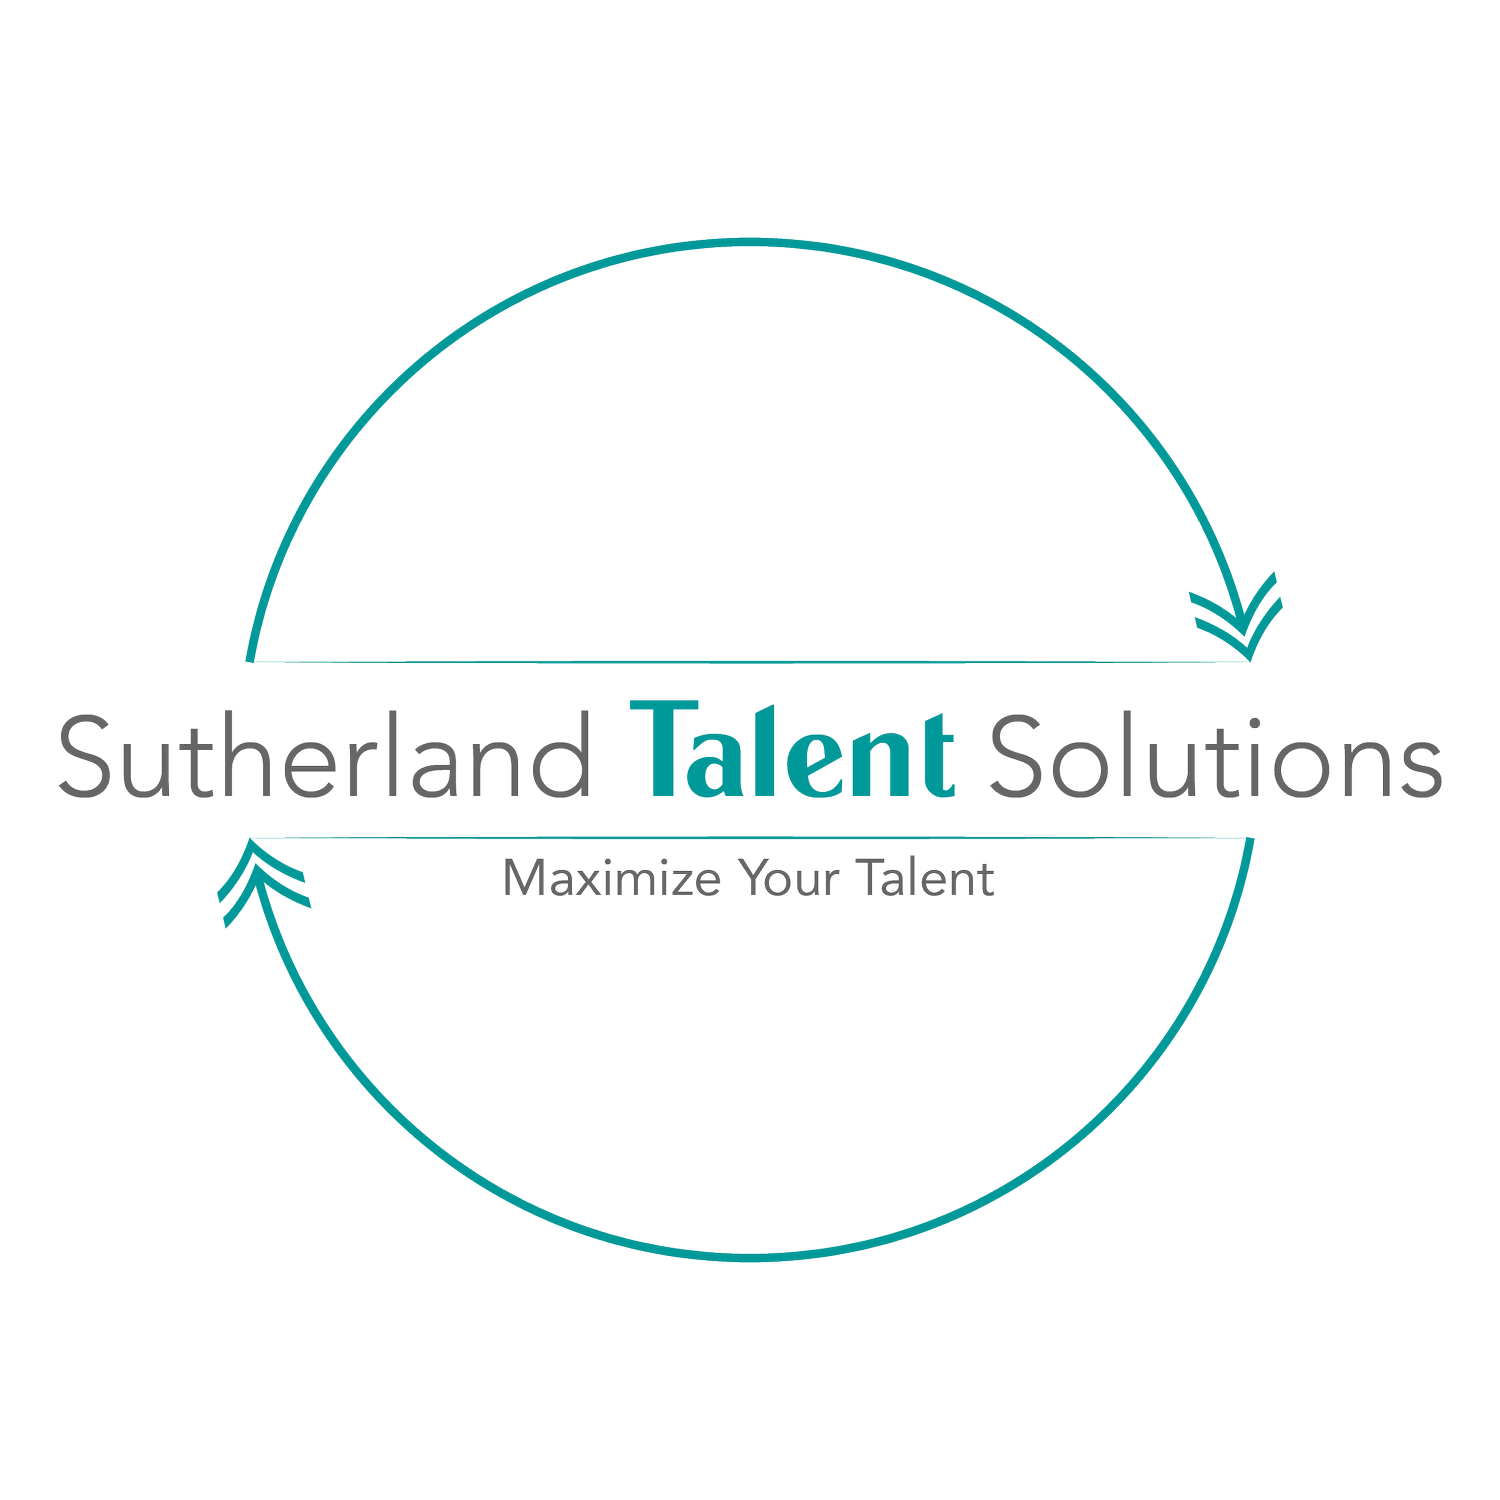 Sutherland Talent Solutions